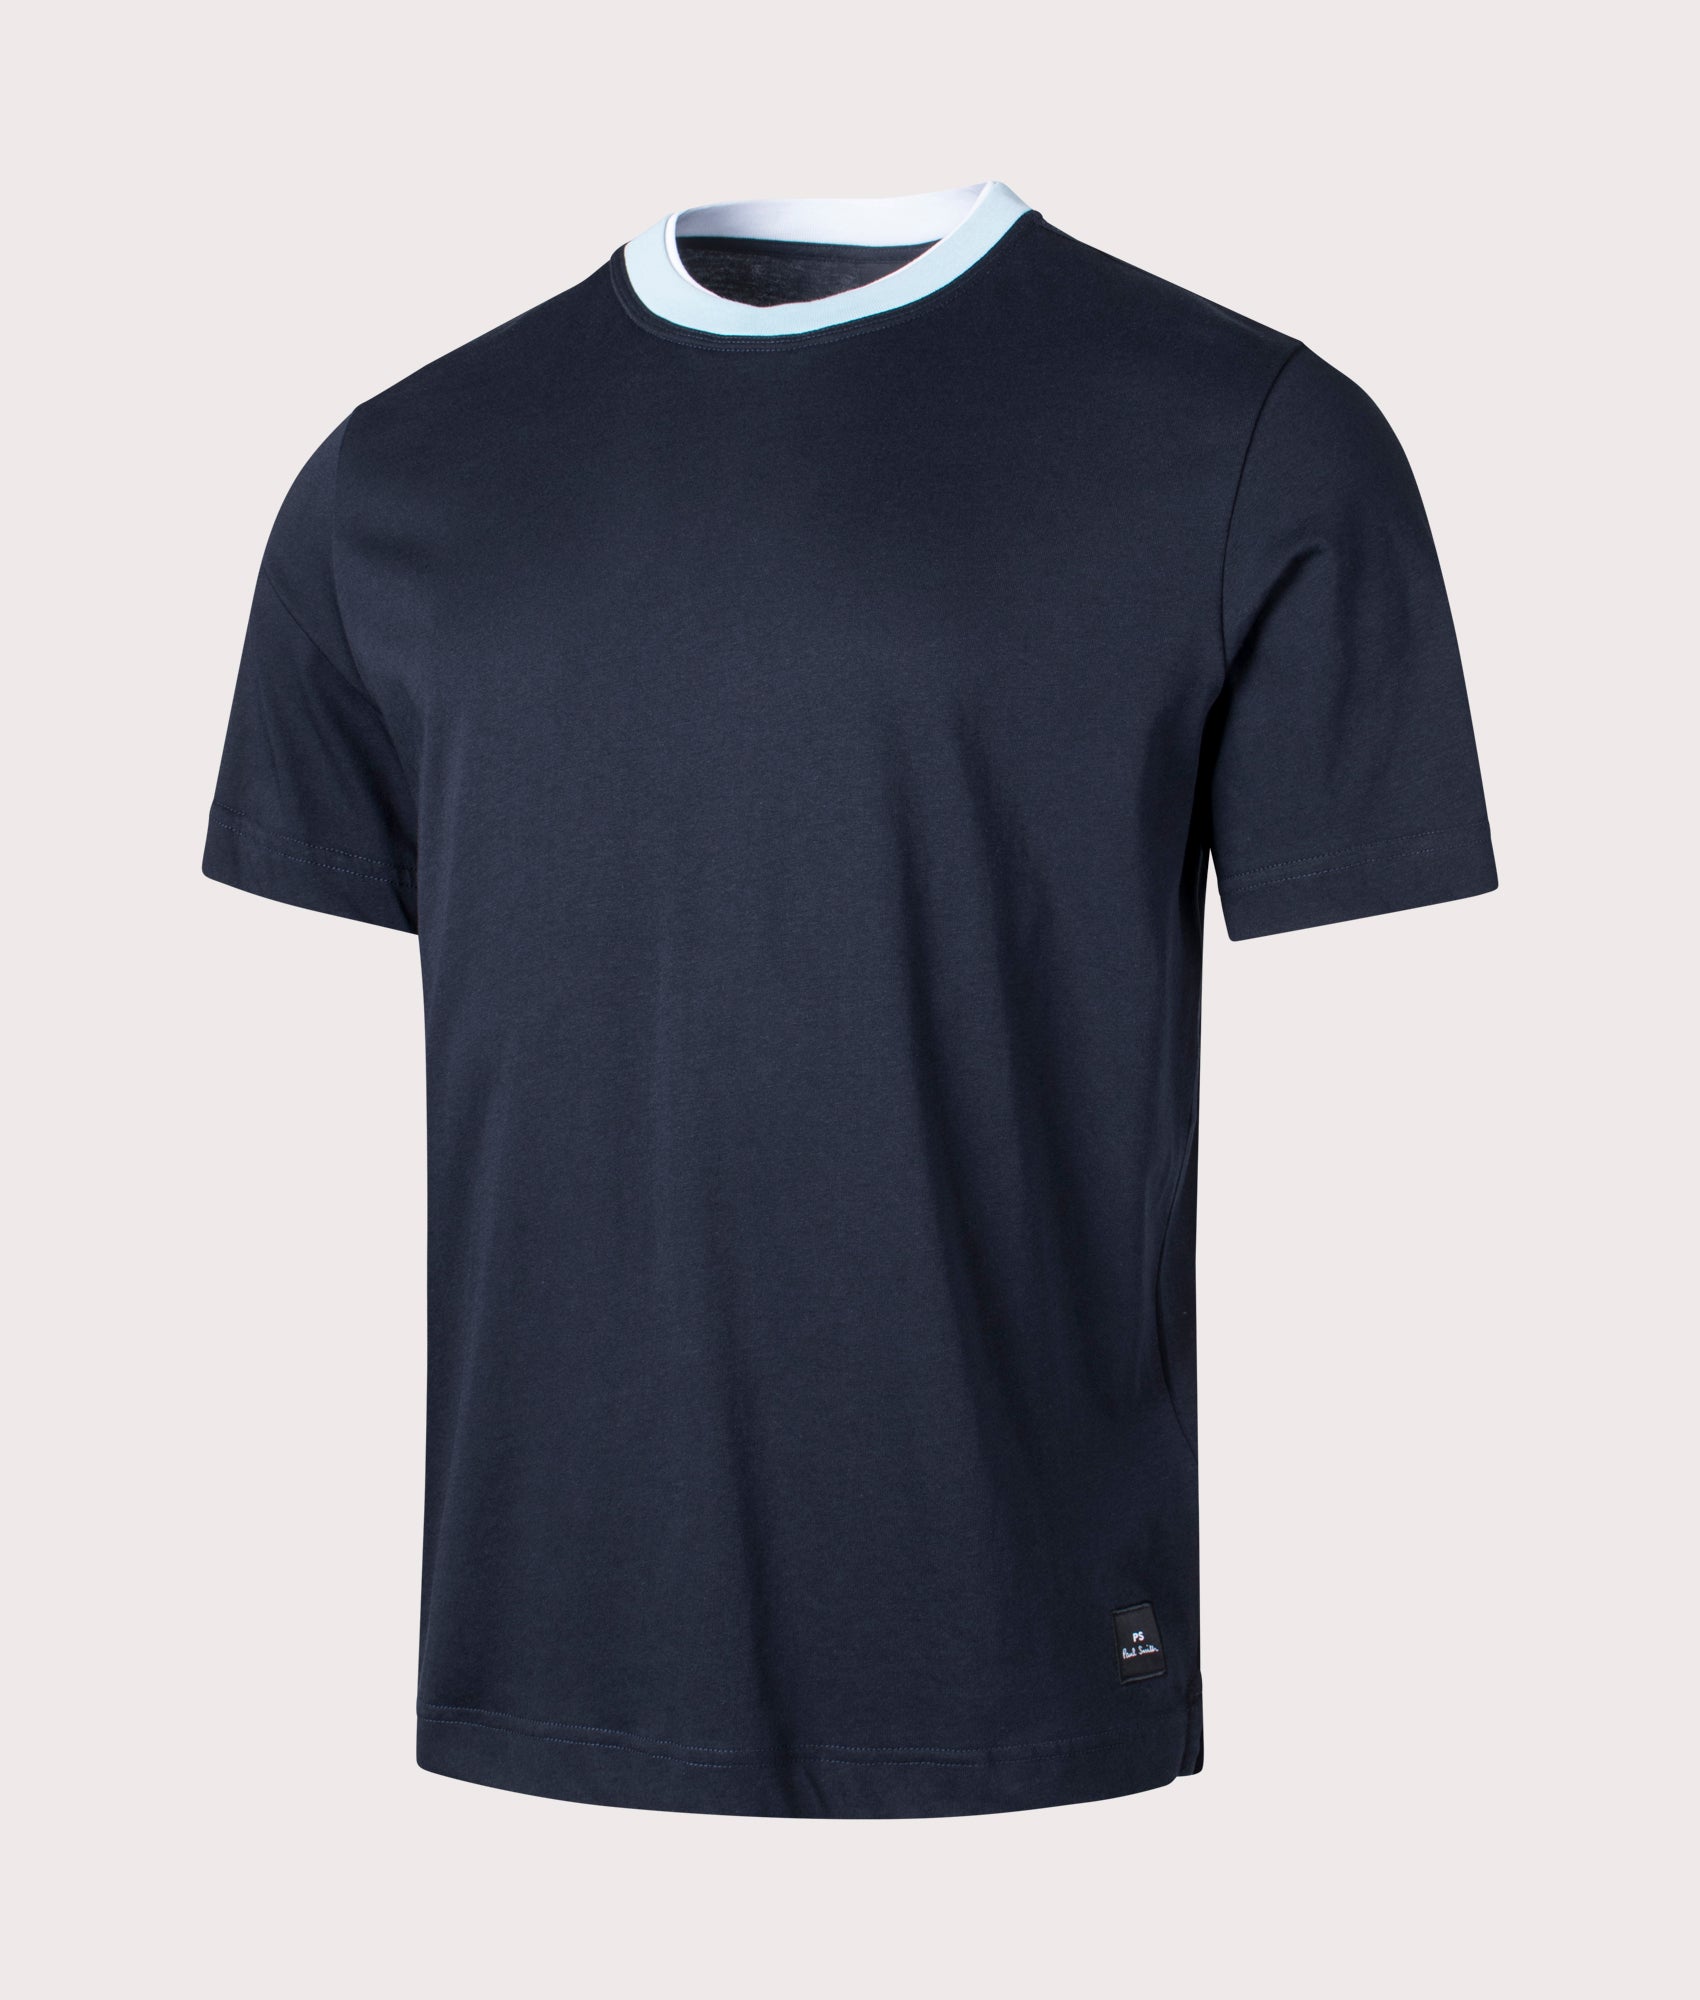 PS Paul Smith Mens Contrast Crew Neck T-Shirt - Colour: 49 Very Dark Navy - Size: Large